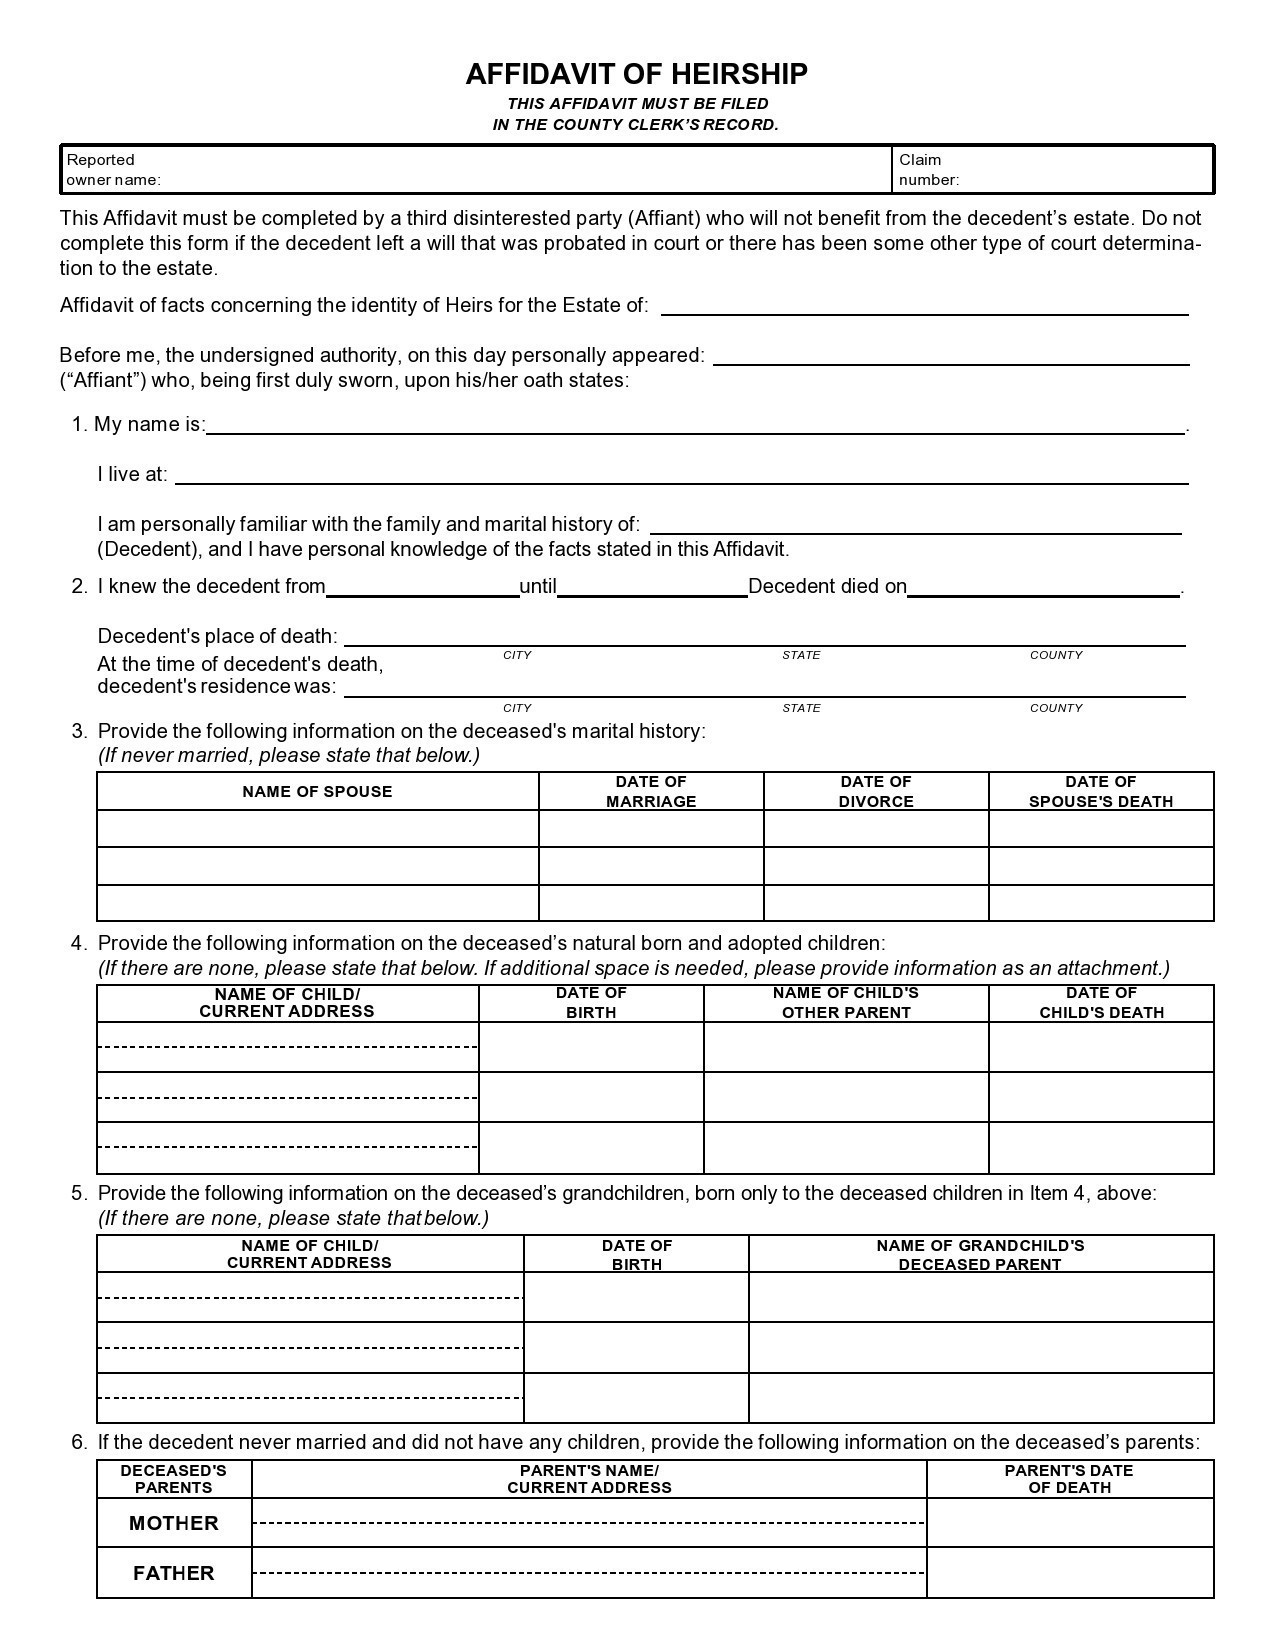 47 FREE Affidavit Of Heirship Forms Letters Certificates 